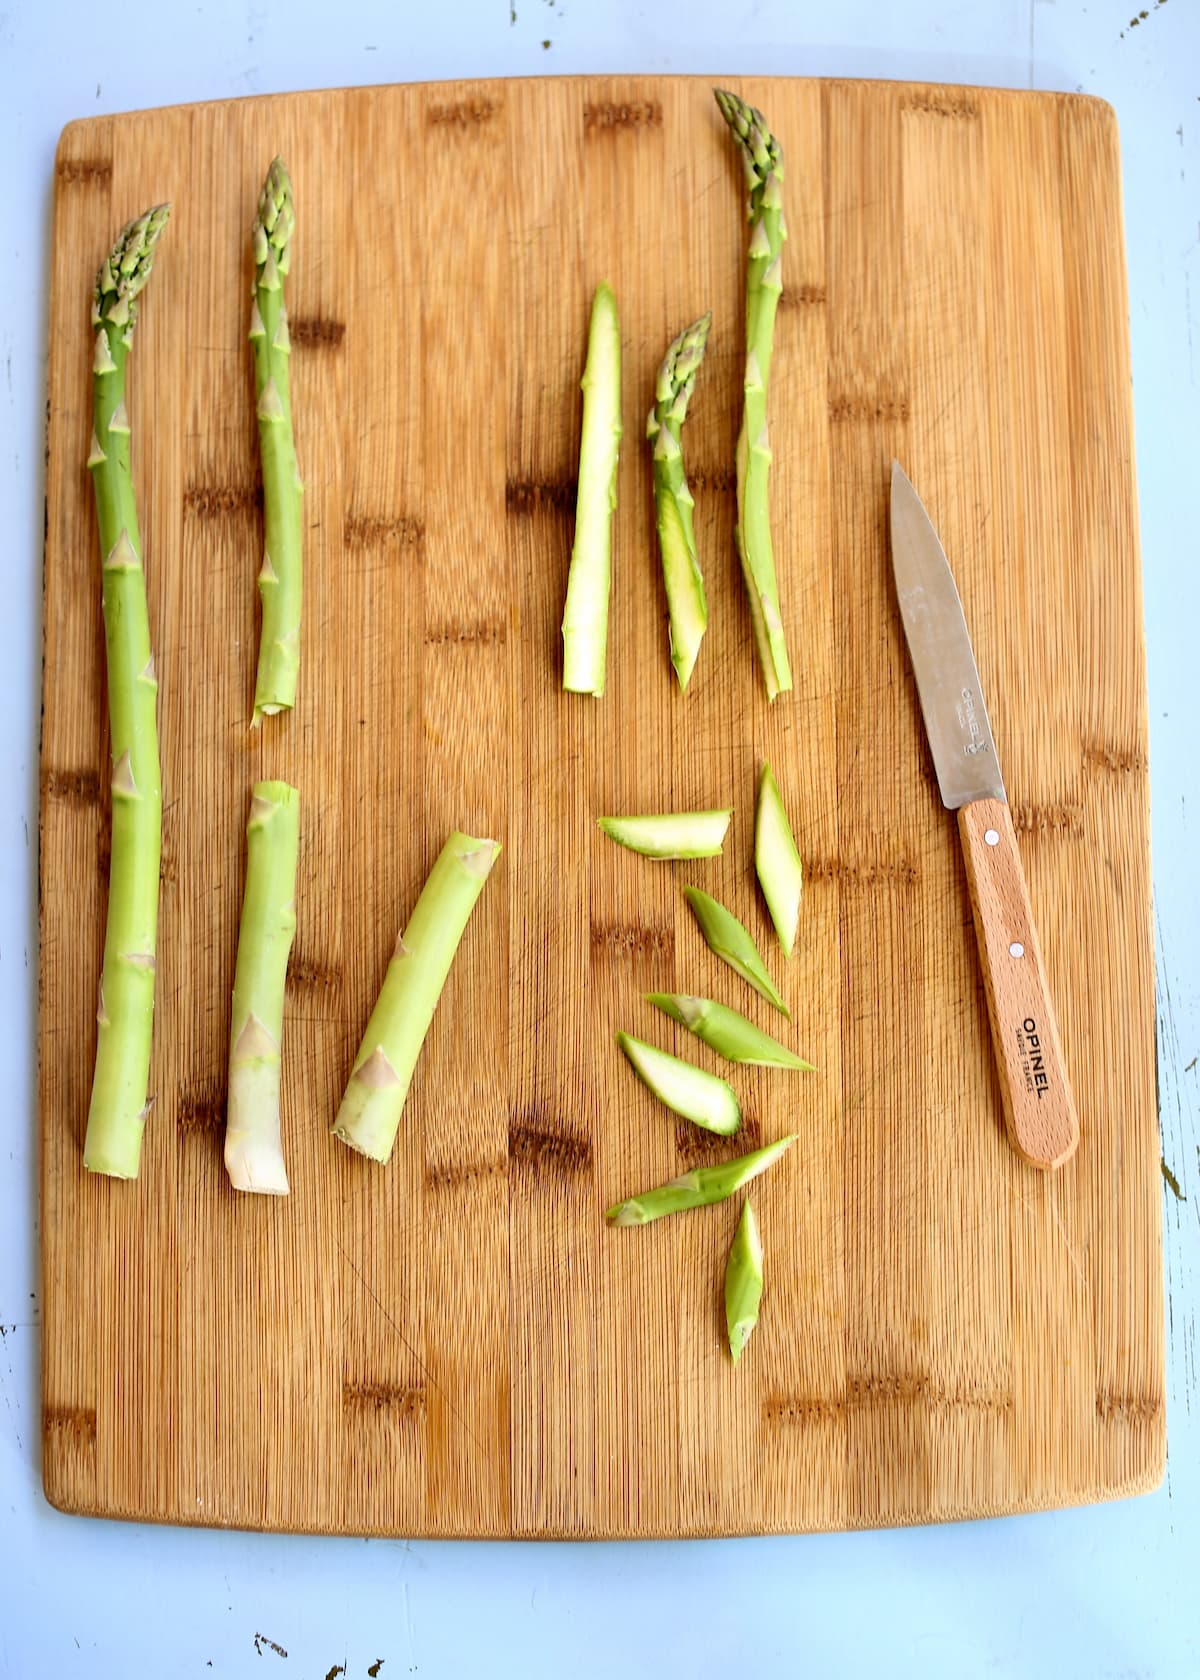 a cutting board with asparagus cuts on it.